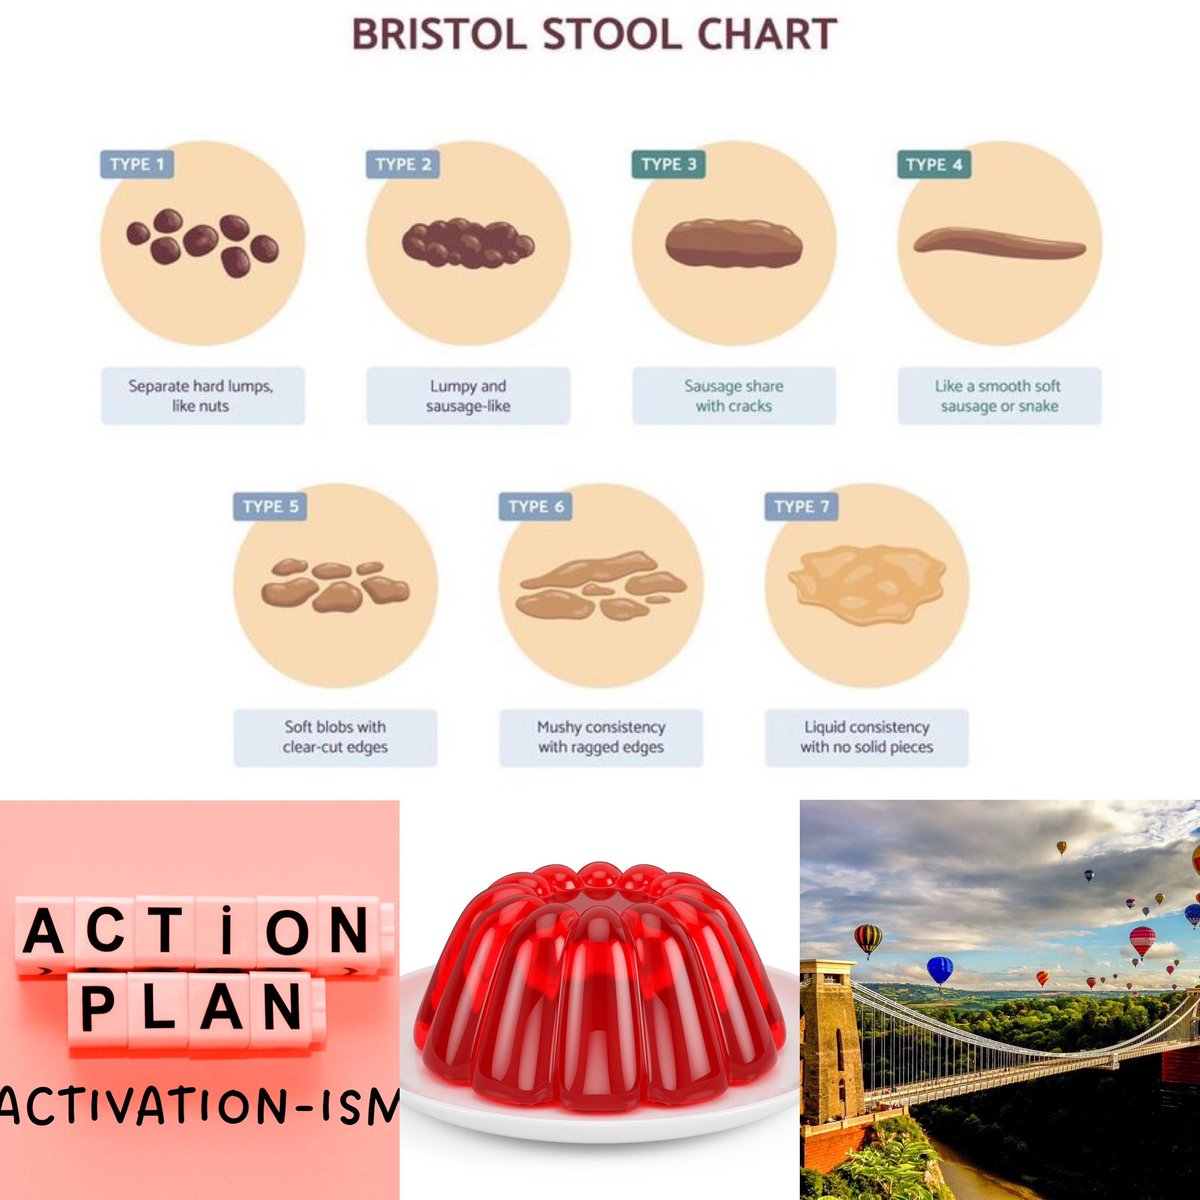 Never one to be deterred by a challenge! How to get the Bristol Stool Chart and raspberry jelly into a presentation? Delighted to join the South West ‘IPC into Action’ #IPCaction conference today to deliver the welcome and opening address. Great to talk about Activation - ism,…